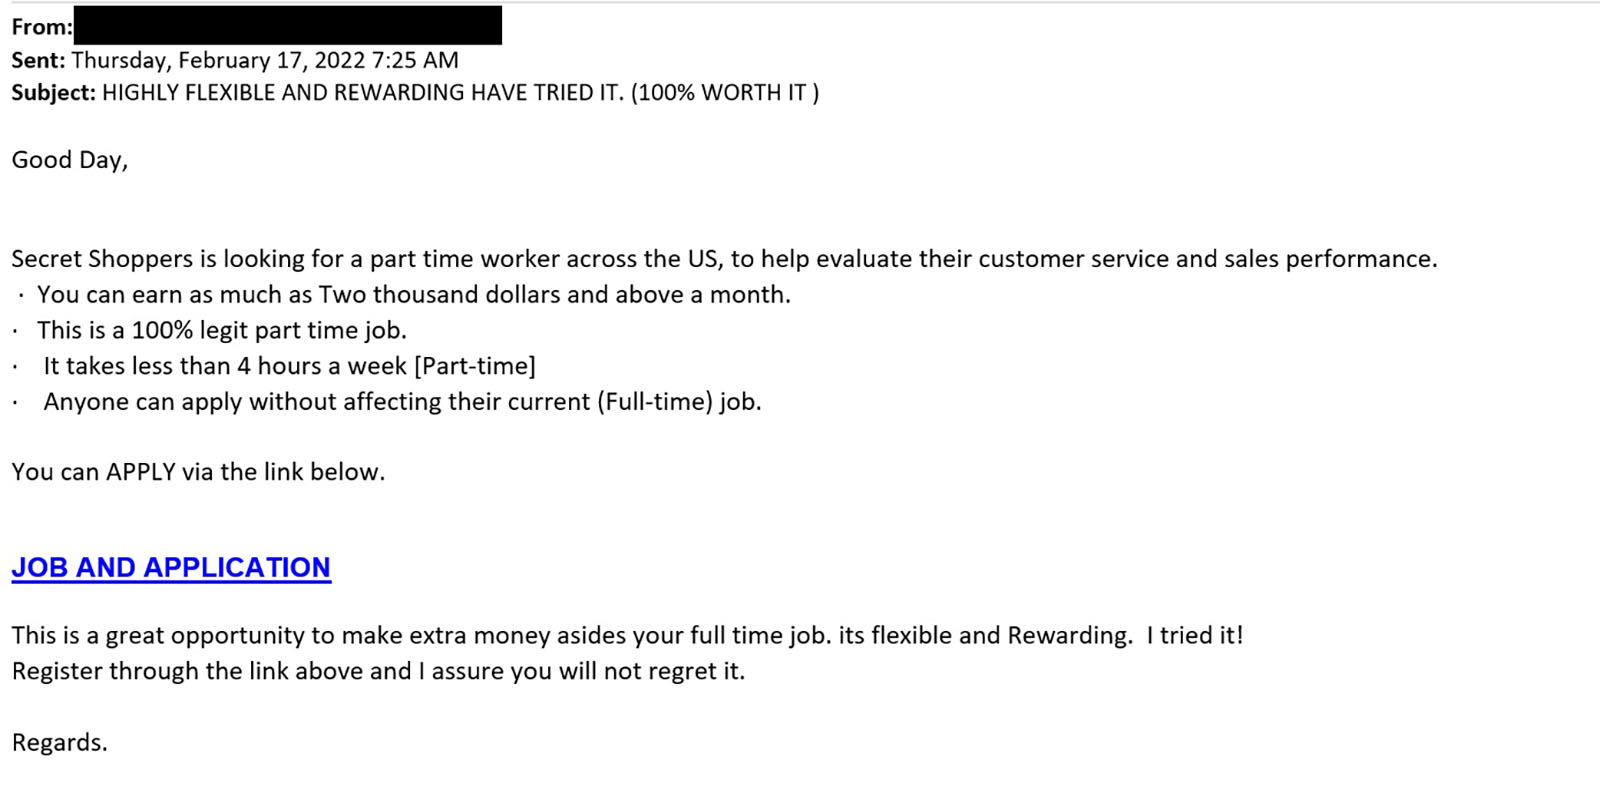 Example of phishing email offering a job as a secret shopper.